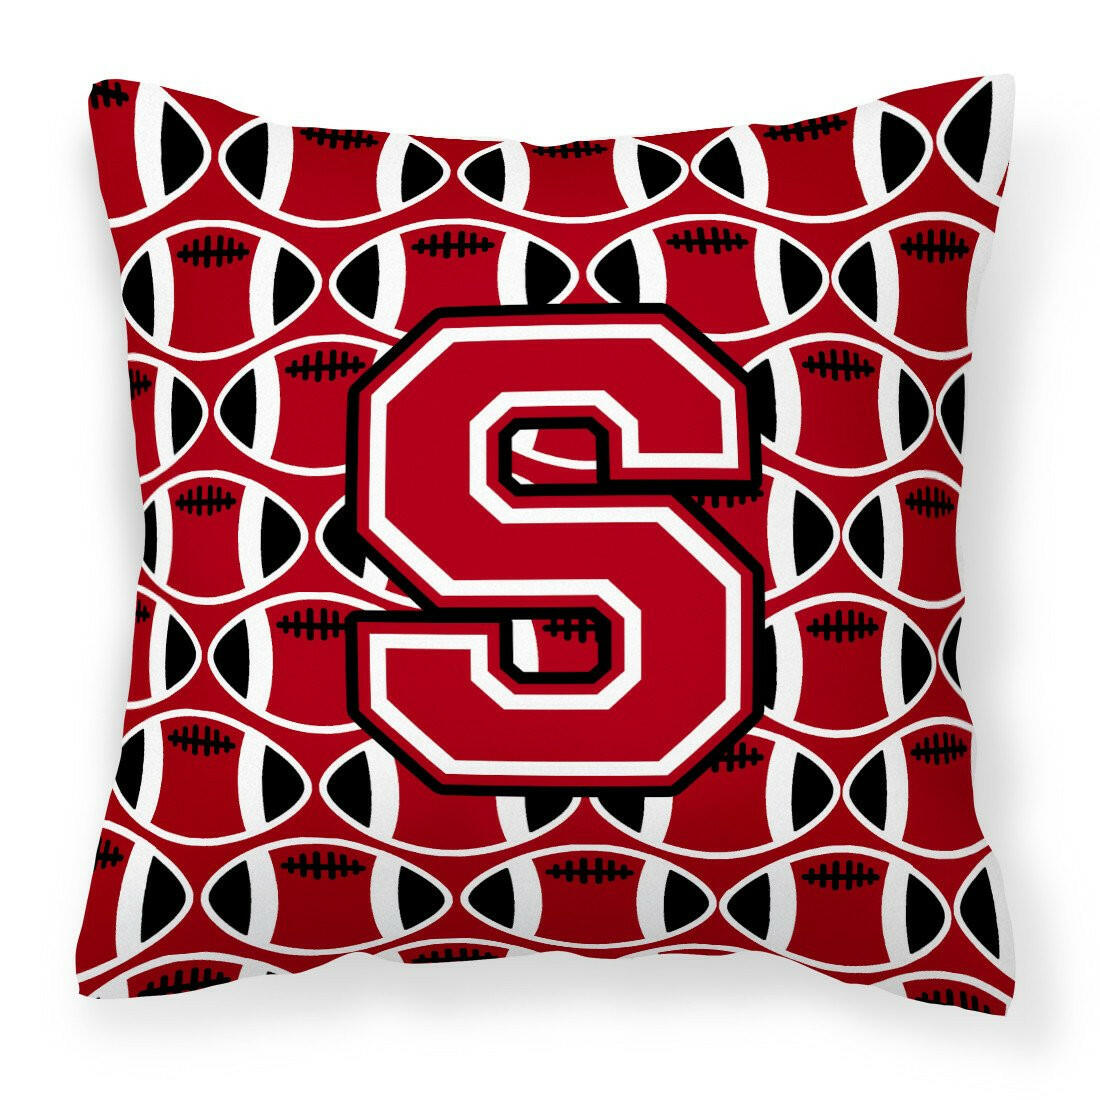 Letter S Football Red, Black and White Fabric Decorative Pillow CJ1073-SPW1414 by Caroline's Treasures